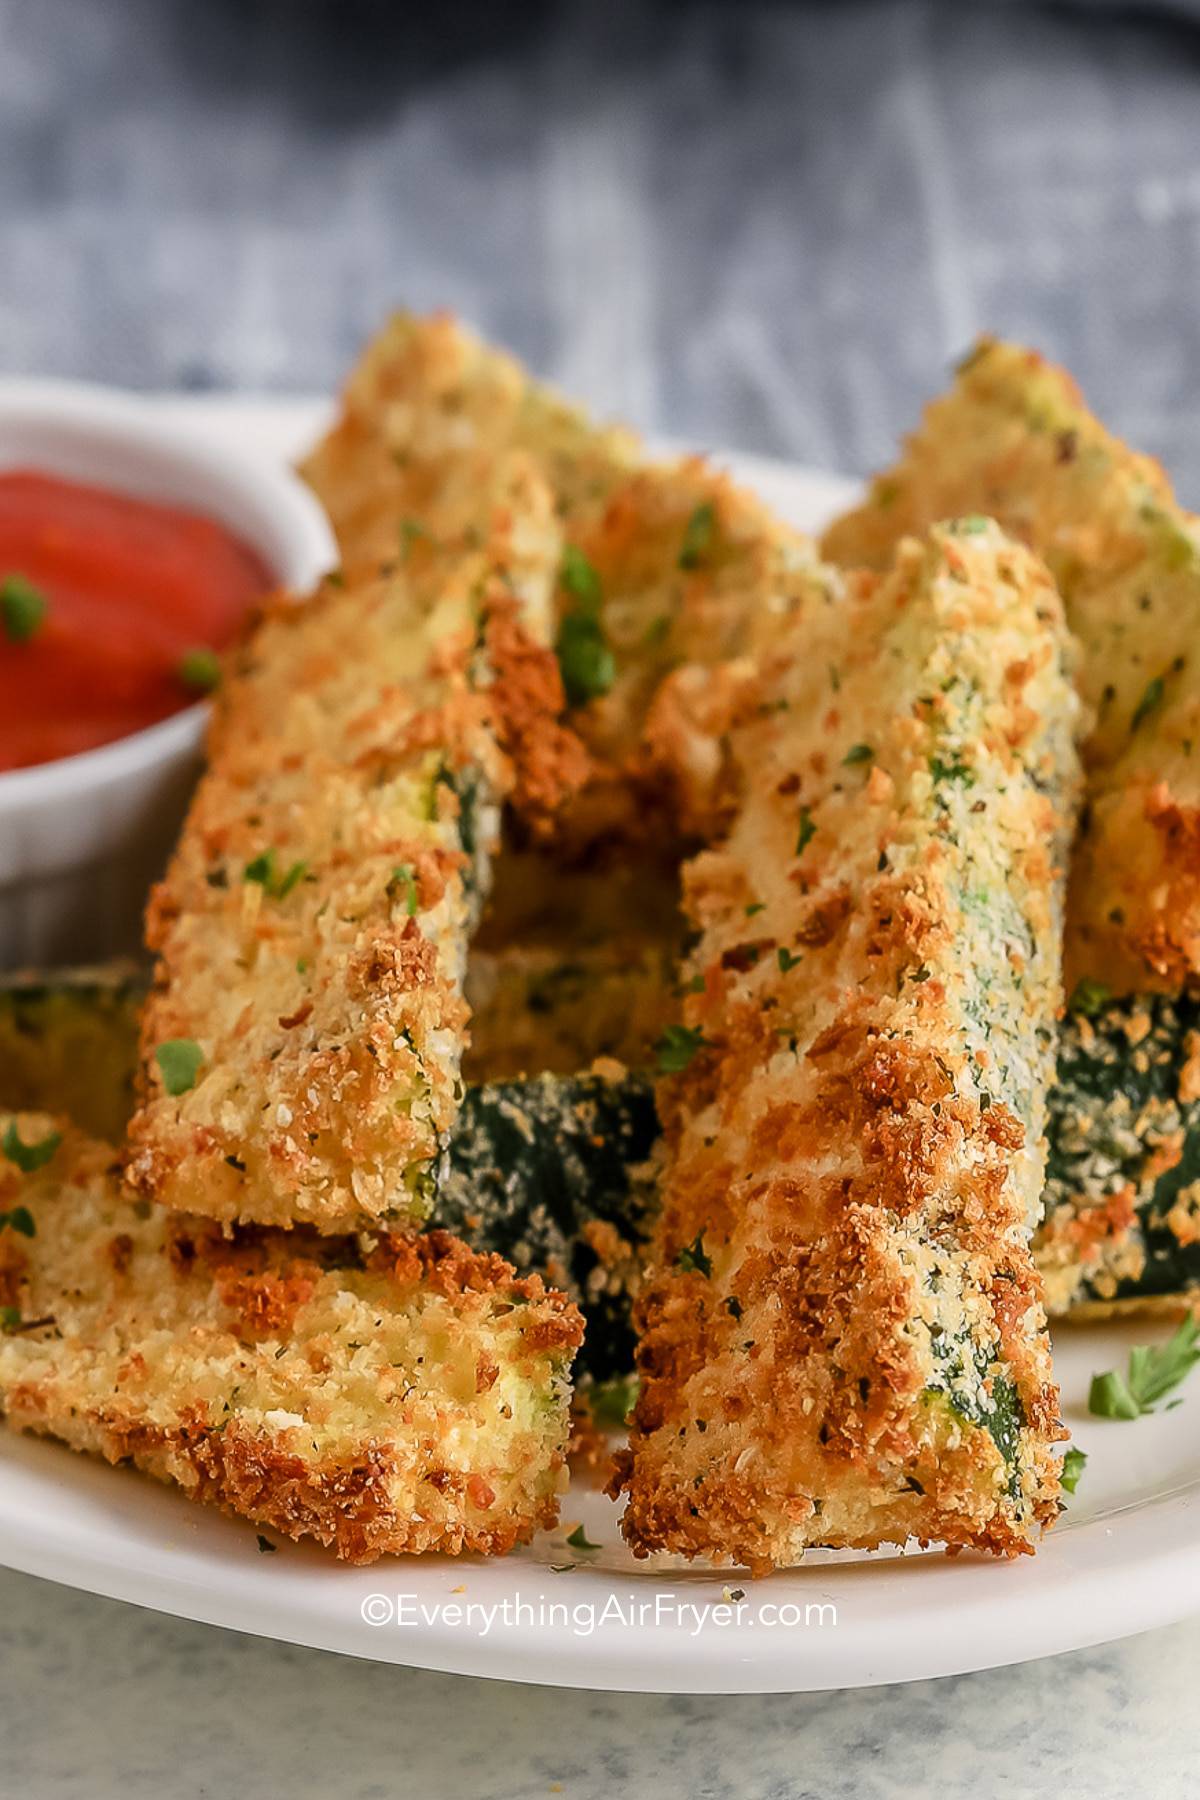 zucchini fries on a plate